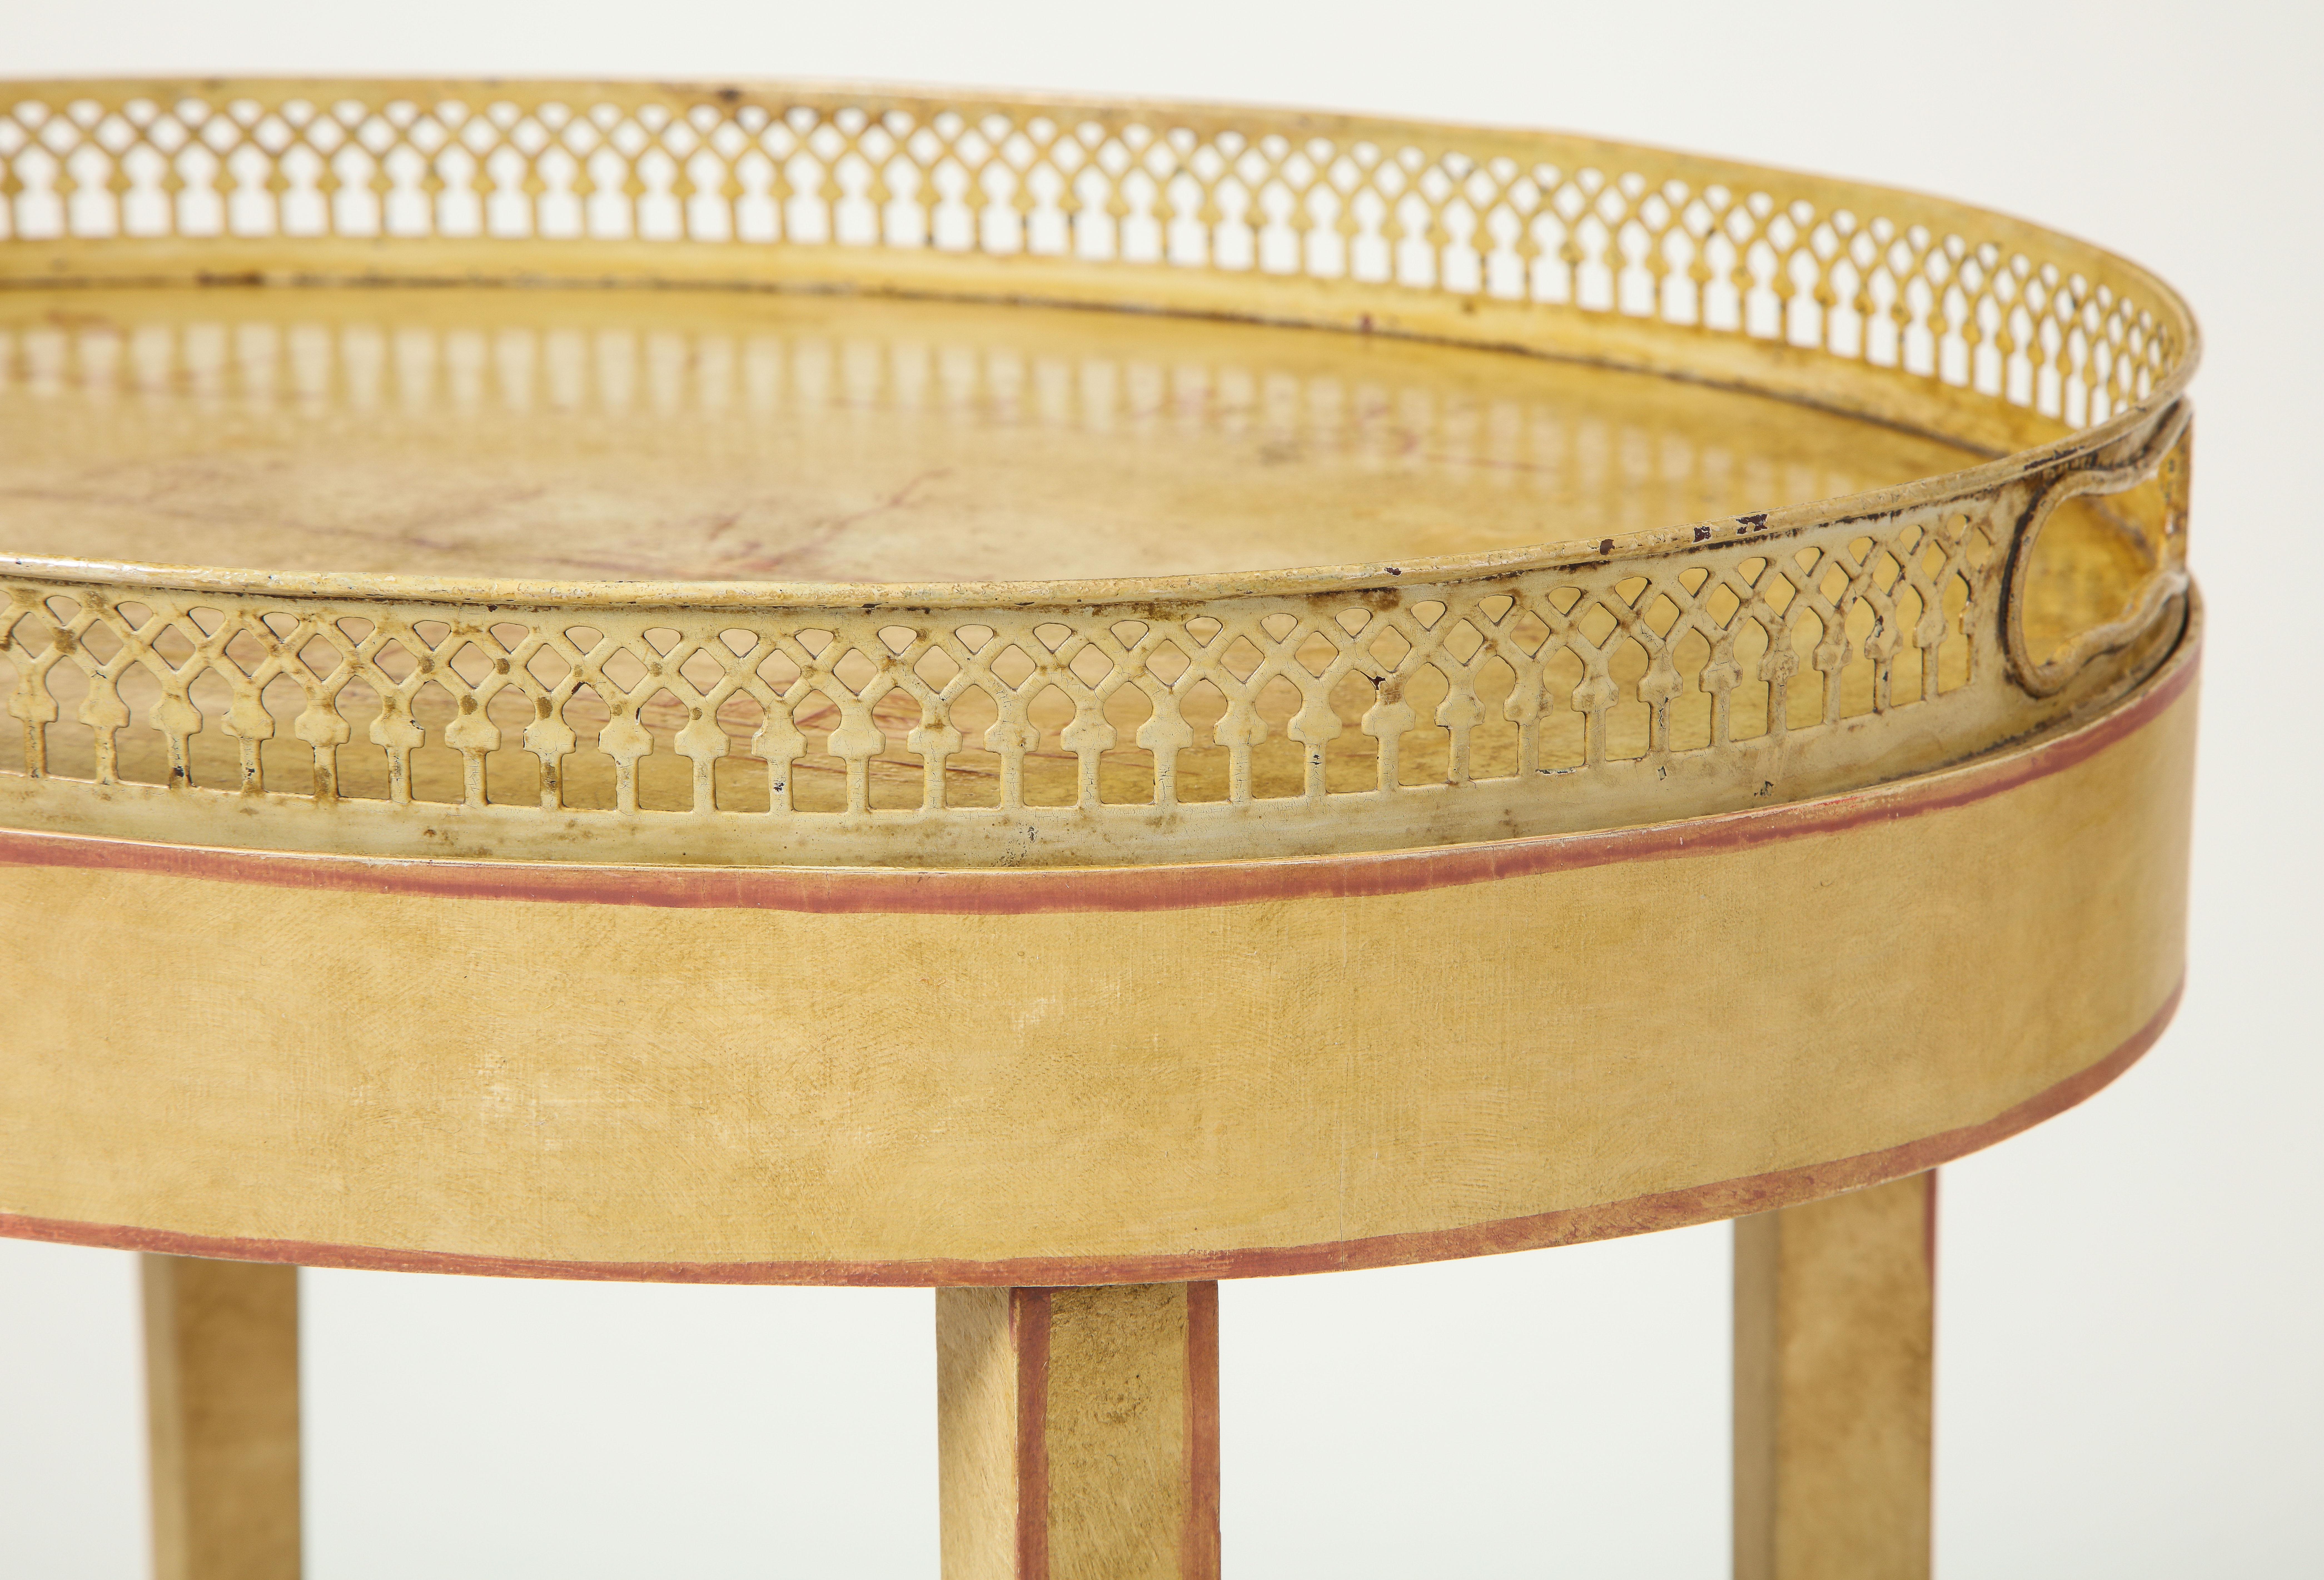 English Cream-Painted Oval Tray Table with Chinoiserie Decoration